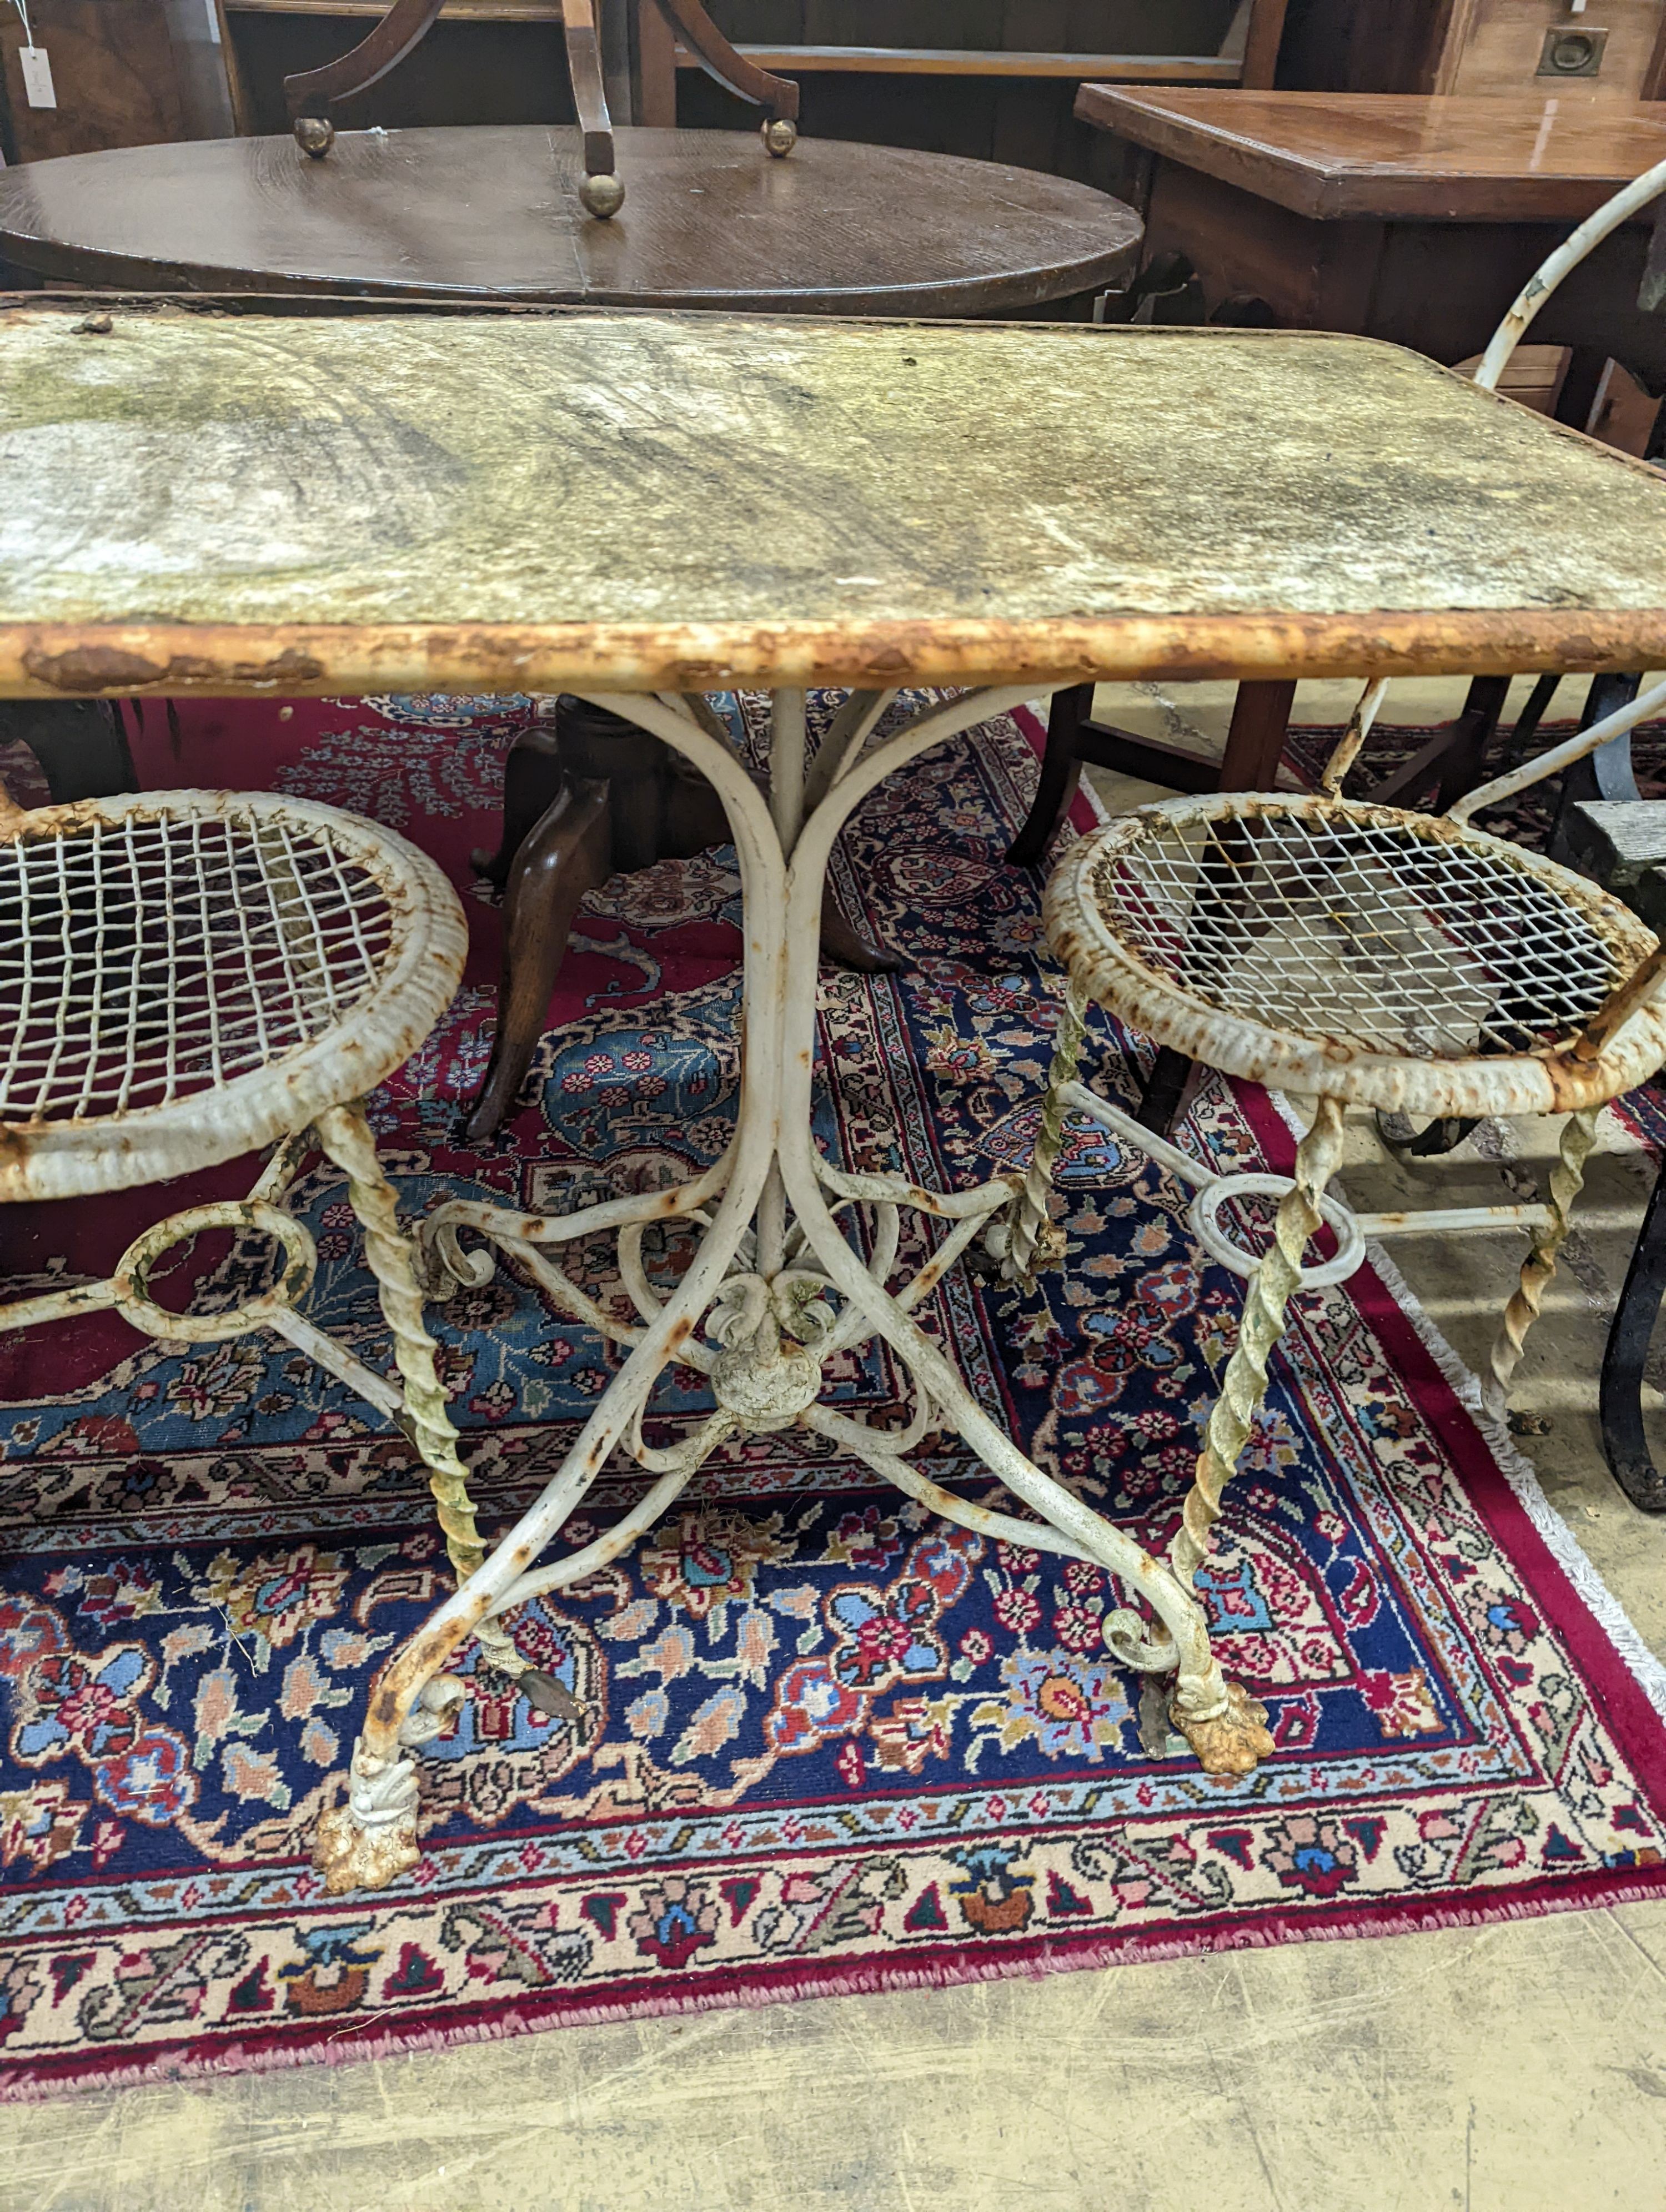 A rectangular French wrought iron garden table, length 80cm, depth 49cm, height 70cm and two chairs